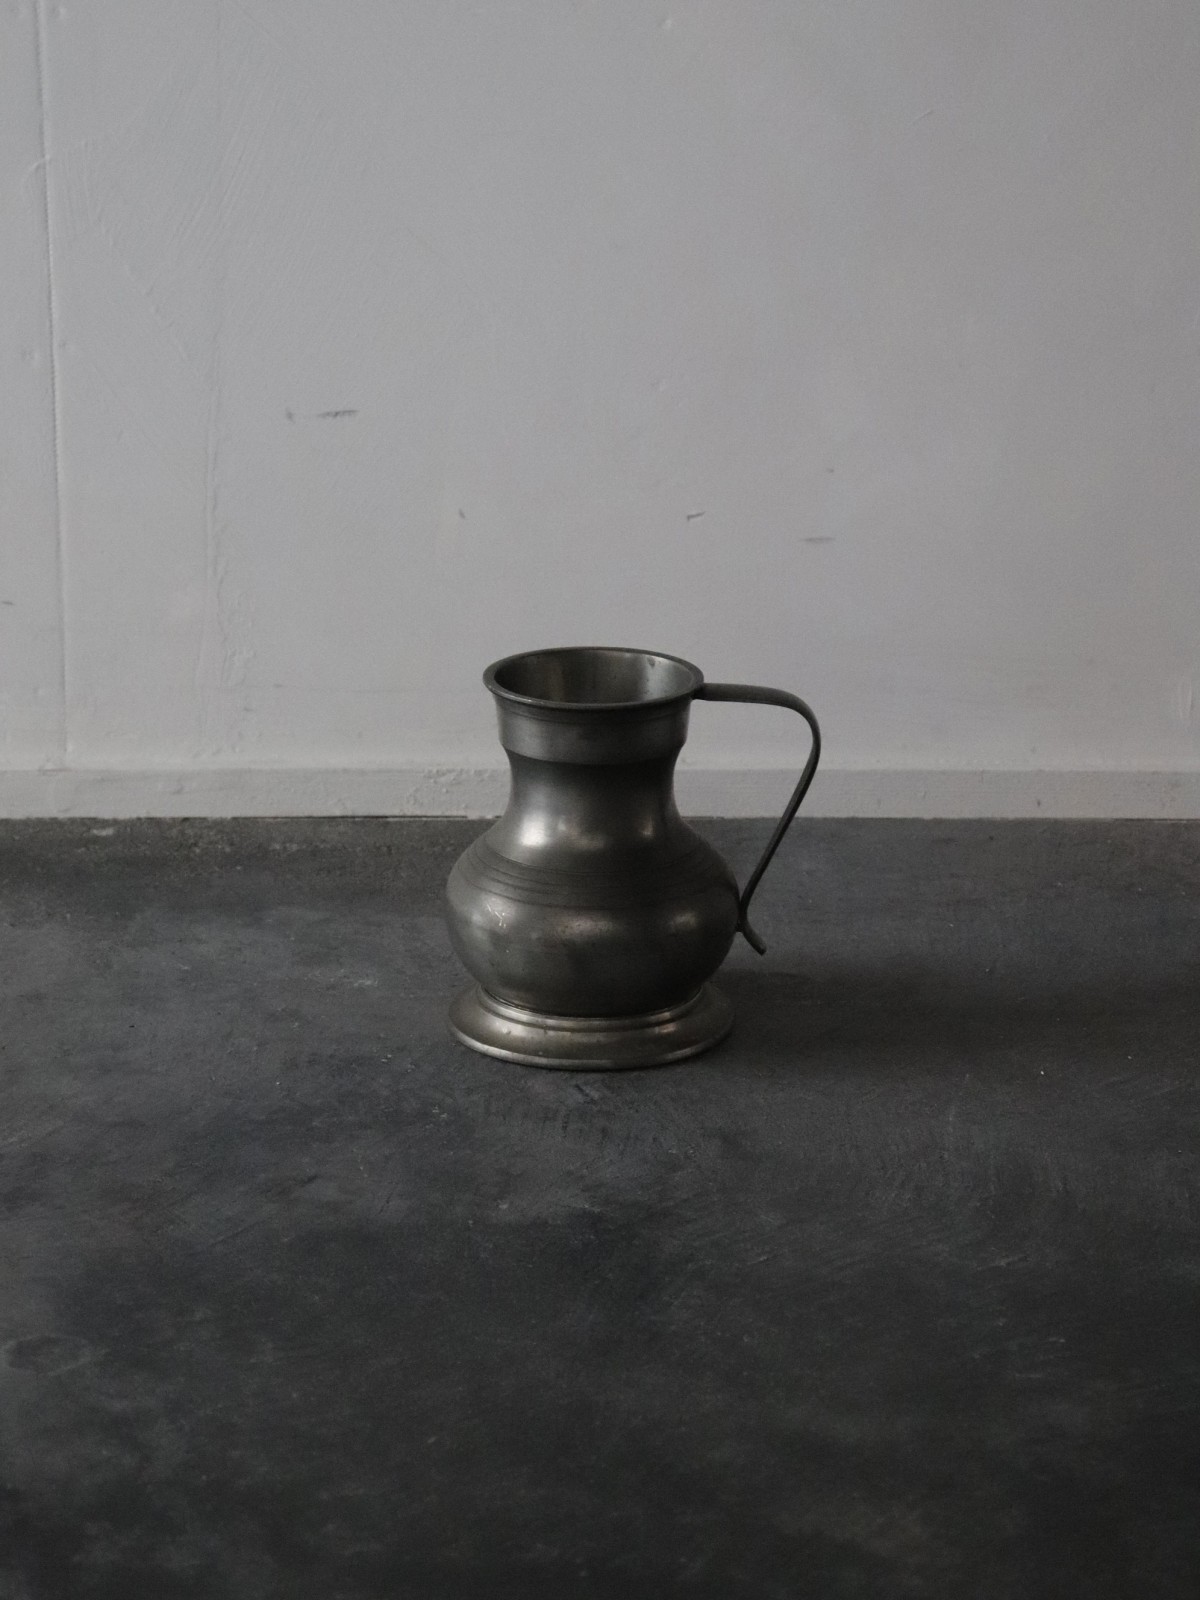 Pewter pitcher, pitcher, England